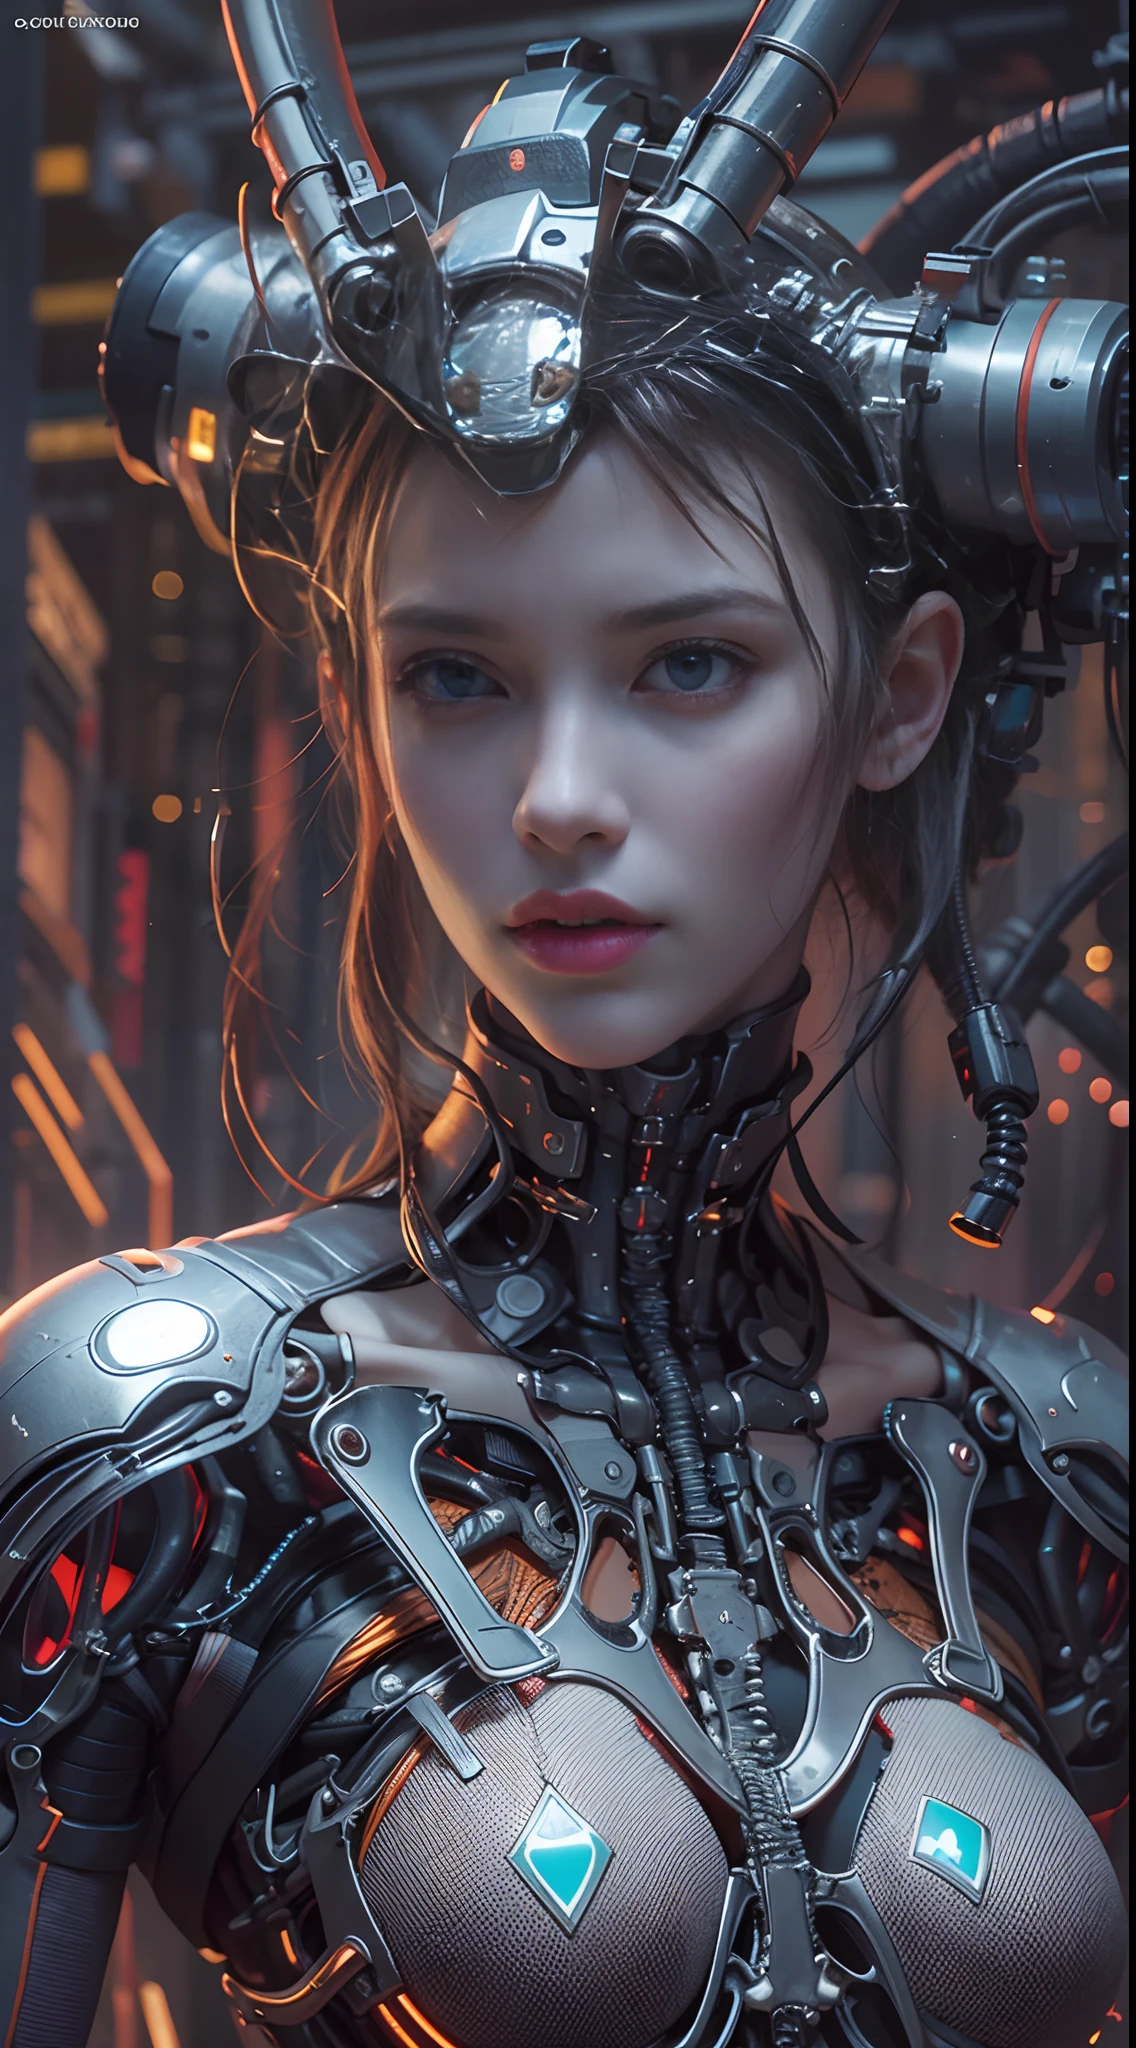 of the highest quality, Tabletop, ultrahigh resolution, ((photorealistic: 1.4), RAW photo, 1 chica cyberpunk, bright and shiny skin, 1 mechanical girl, (Super realistic details)), mechanical limbs, Tubes attached to mechanical parts, Mechanical vertebrae attached to the spine, mechanical cervical attachment to the neck, wires and cables that connect to the head, Evangelion, Ghost in the shell, Small luminous light, global ilumination, deep shadows, octane rendering, 8k, ultrasharp, Metal, Intricate ornamental details, baroque details, very intricate details, realistic light, Trends in CG, in front of camera, Neon light detail, (Android factory in the background), art by H.r. Giger and Alphonse Mucha.